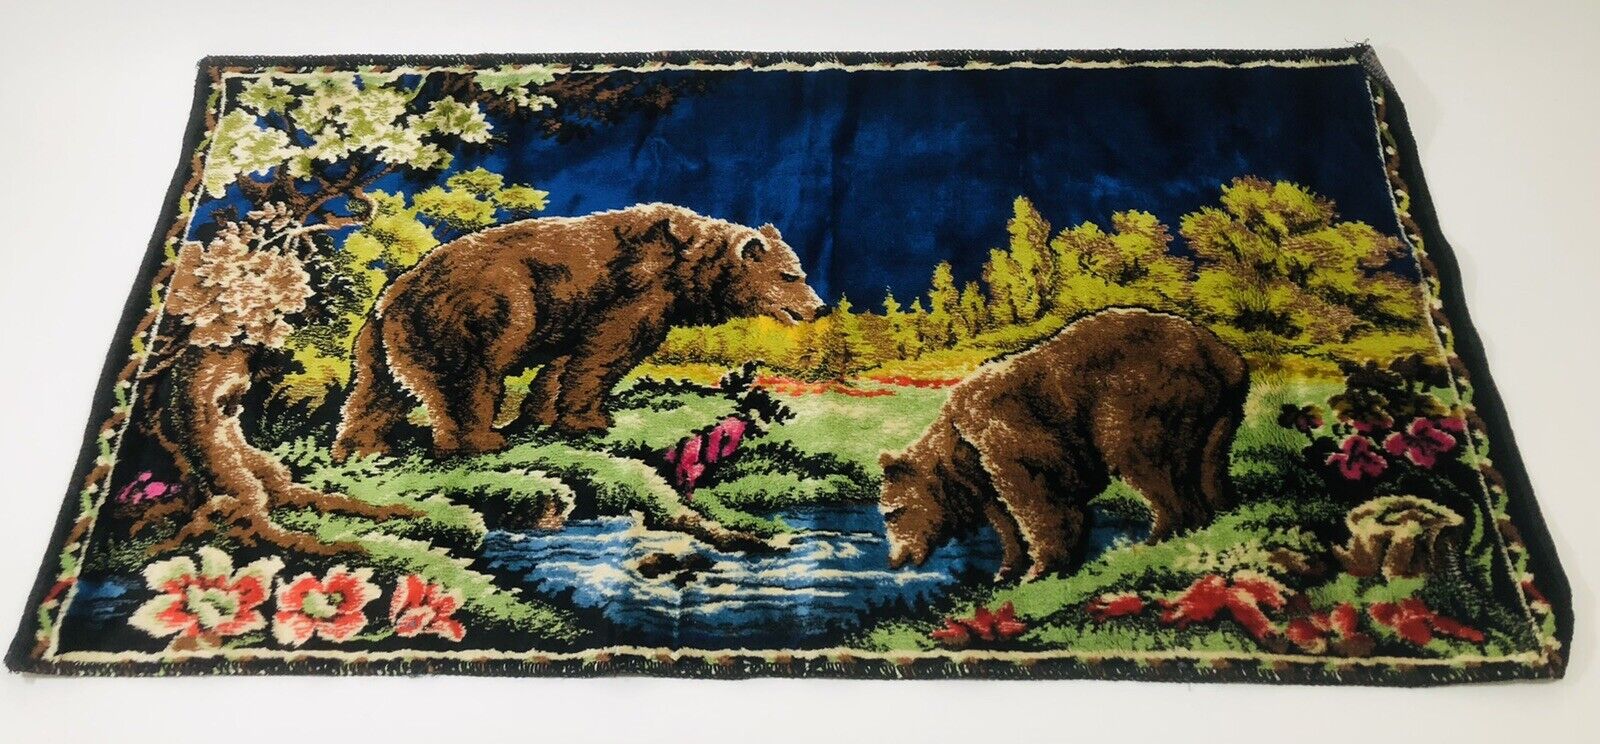 Vintage Bear Tapestry Made in Italy Boho Chic Decorative Wall Hanging Rug